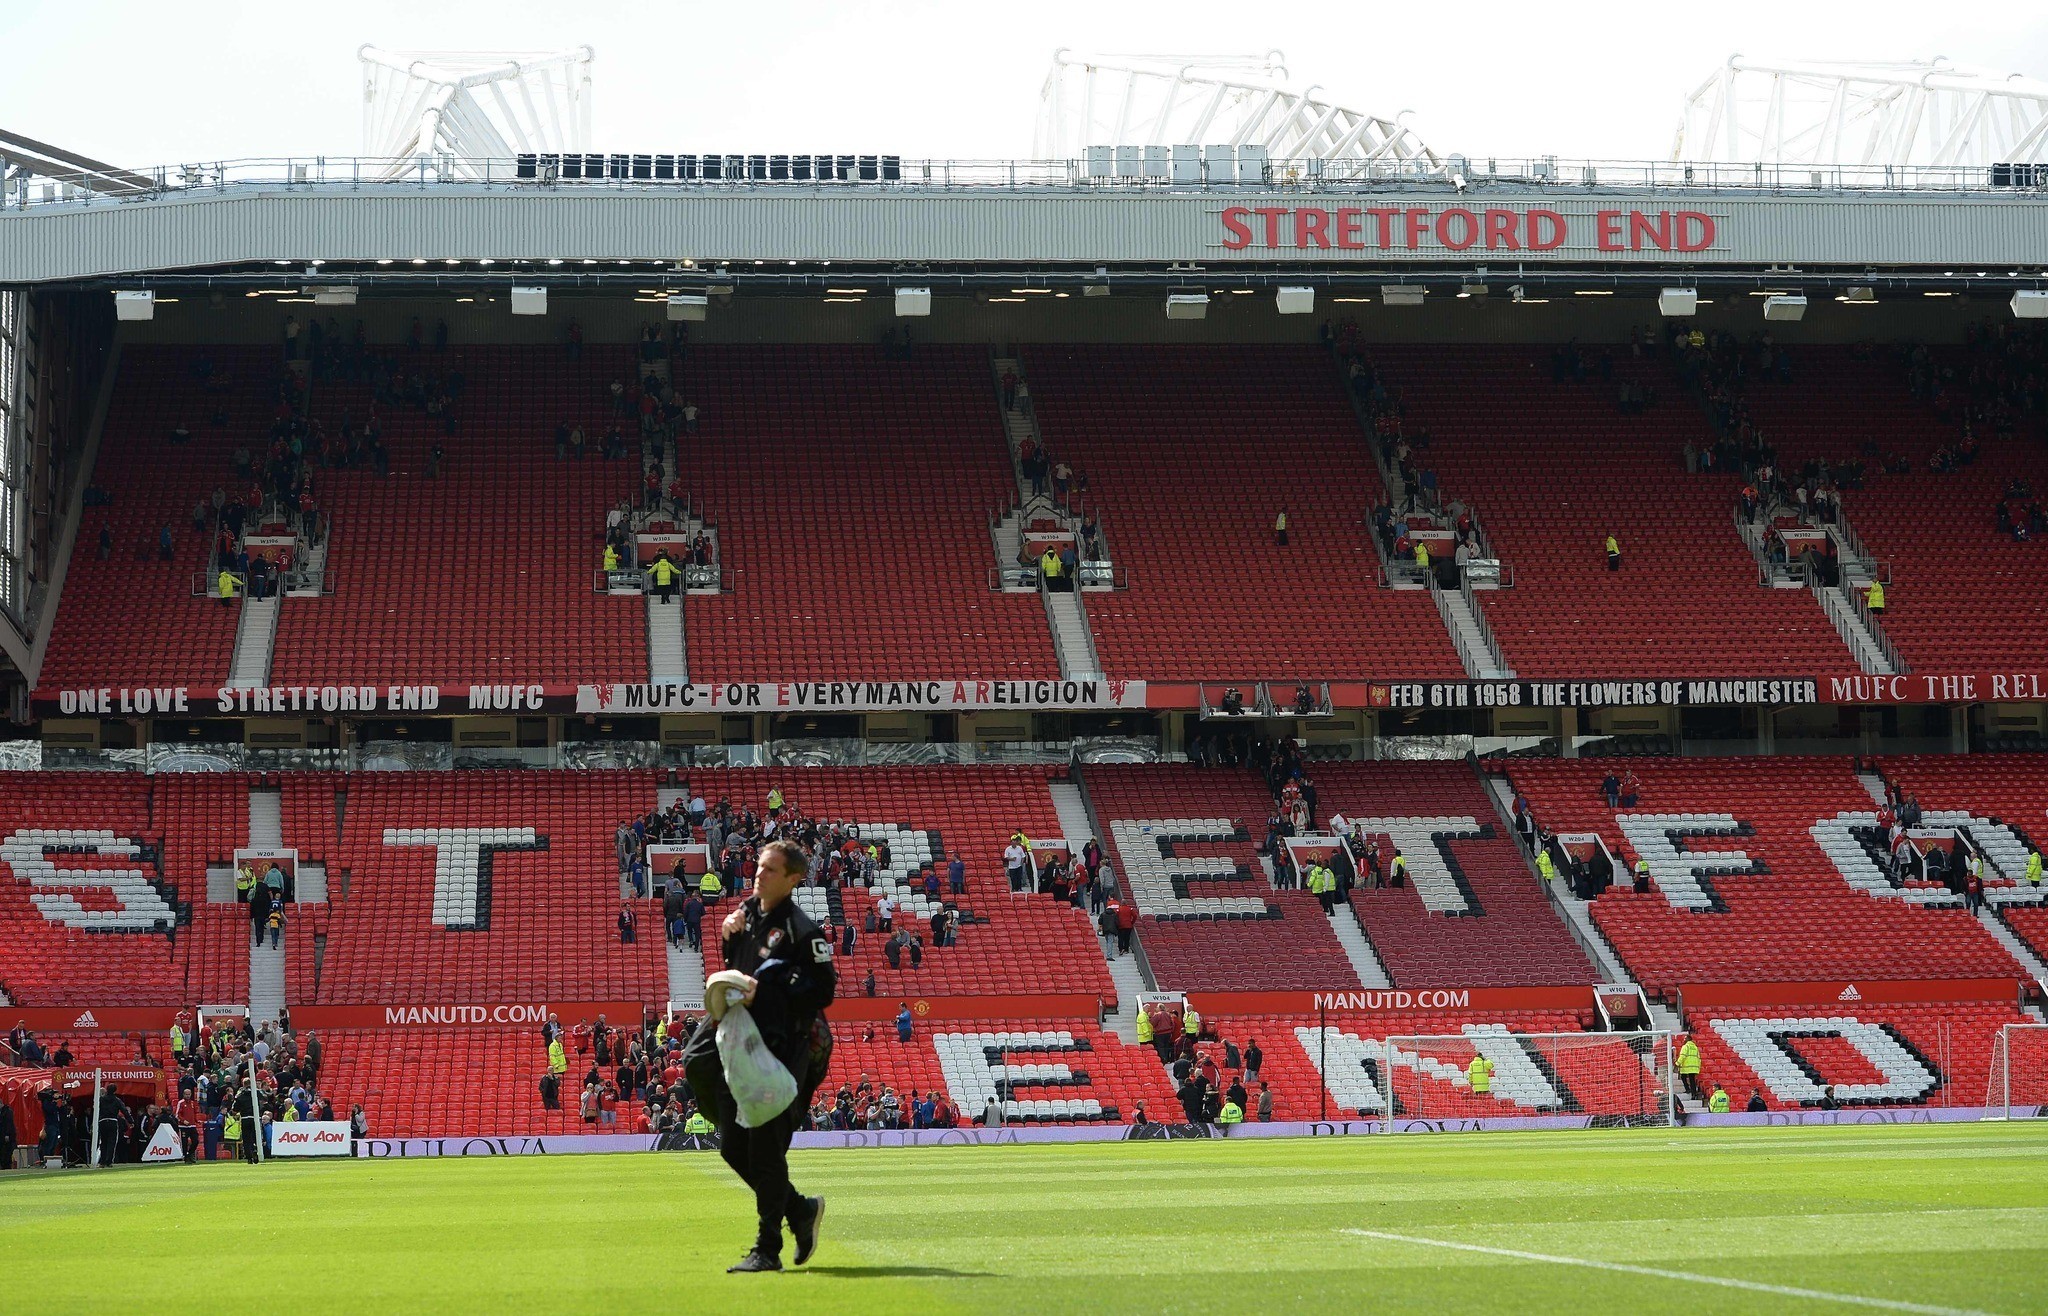 Police: Fake bomb at Manchester United's stadium left from training